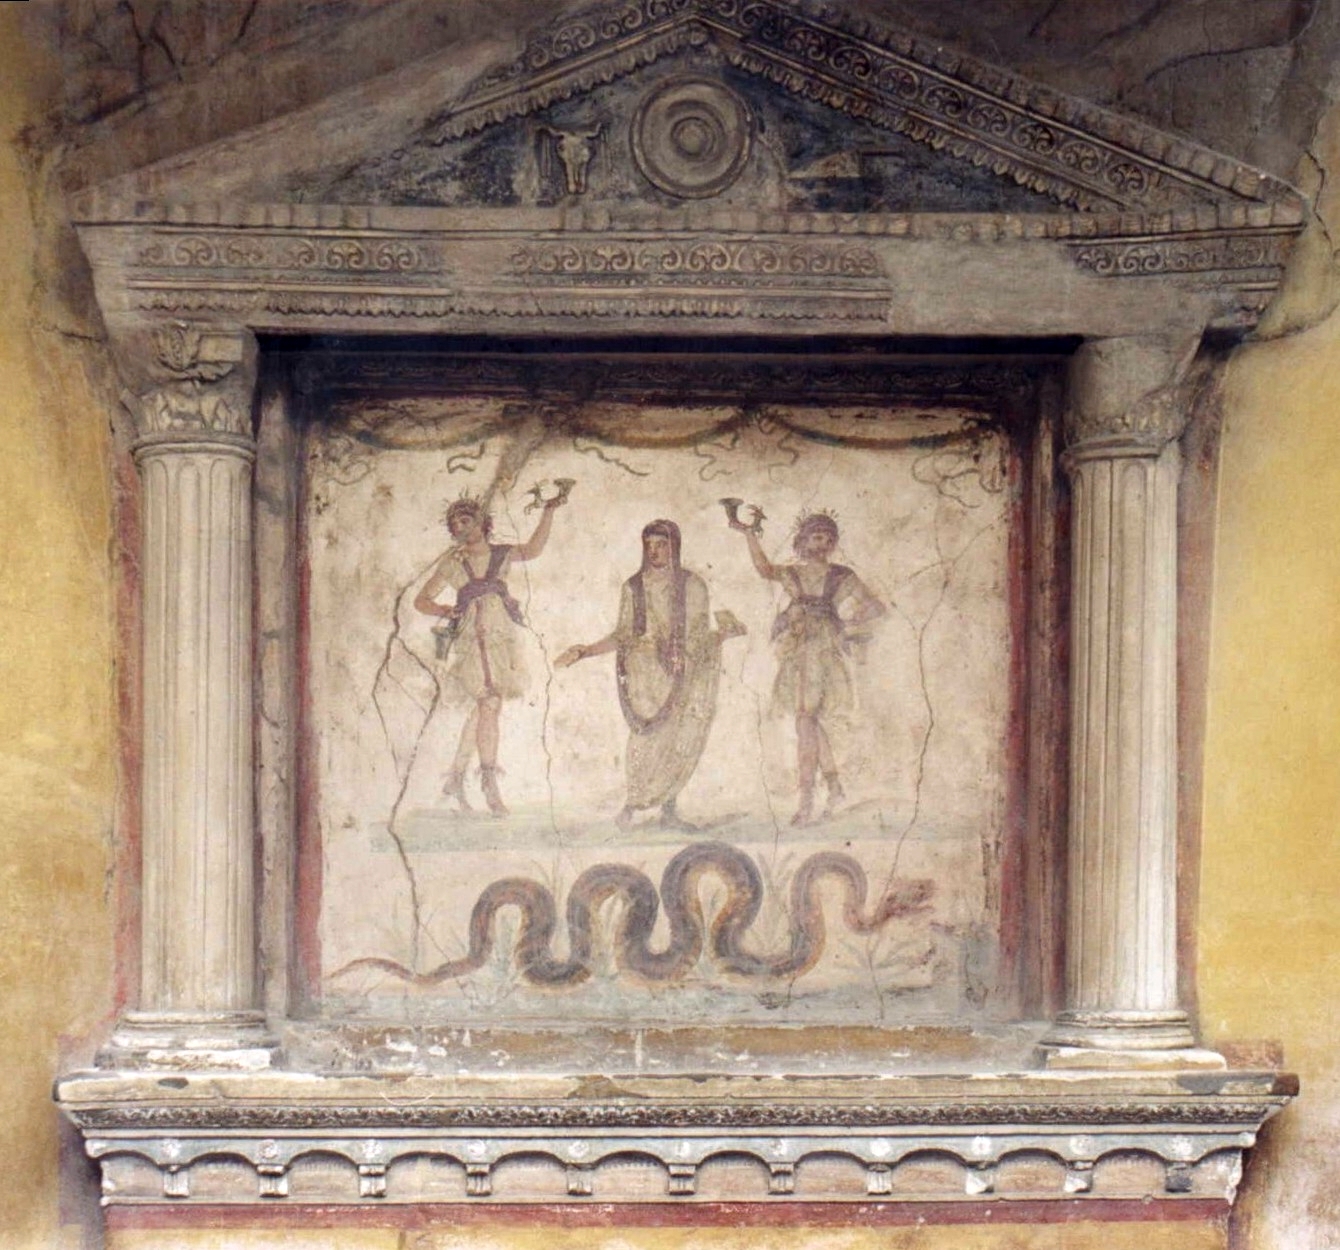 A lararium shrine framed by temple-like columns and pediment. Inside the columns, a fresco depicting the genius in a purple-trimmed toga, flanked by two lares holding cornucopias. A large snake in grass slithers beneath their feet.